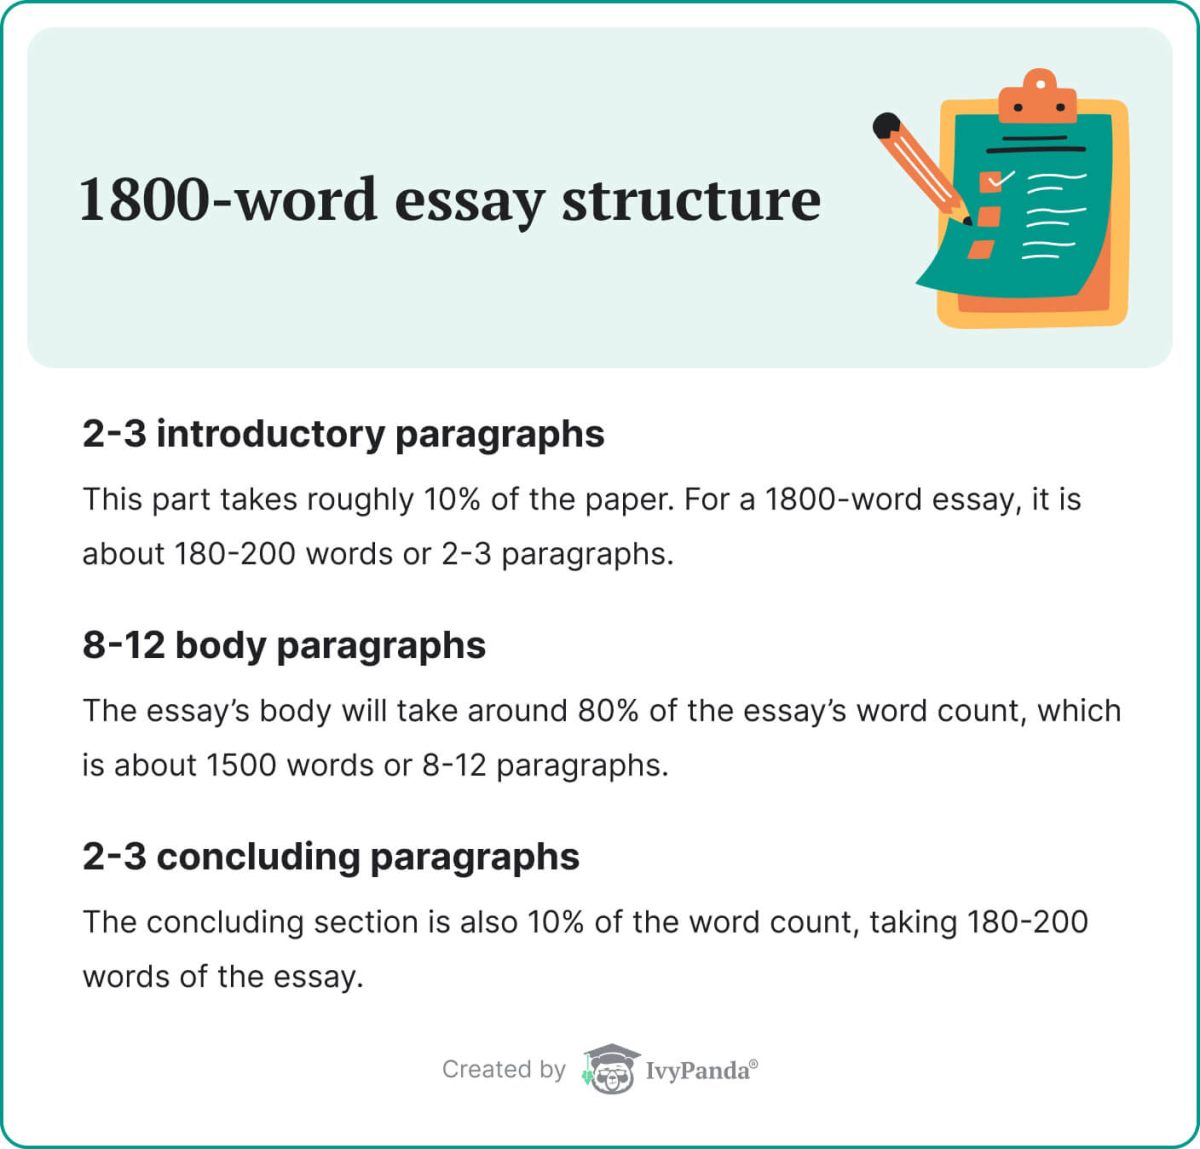 The picture describes 1800-word essay structure.